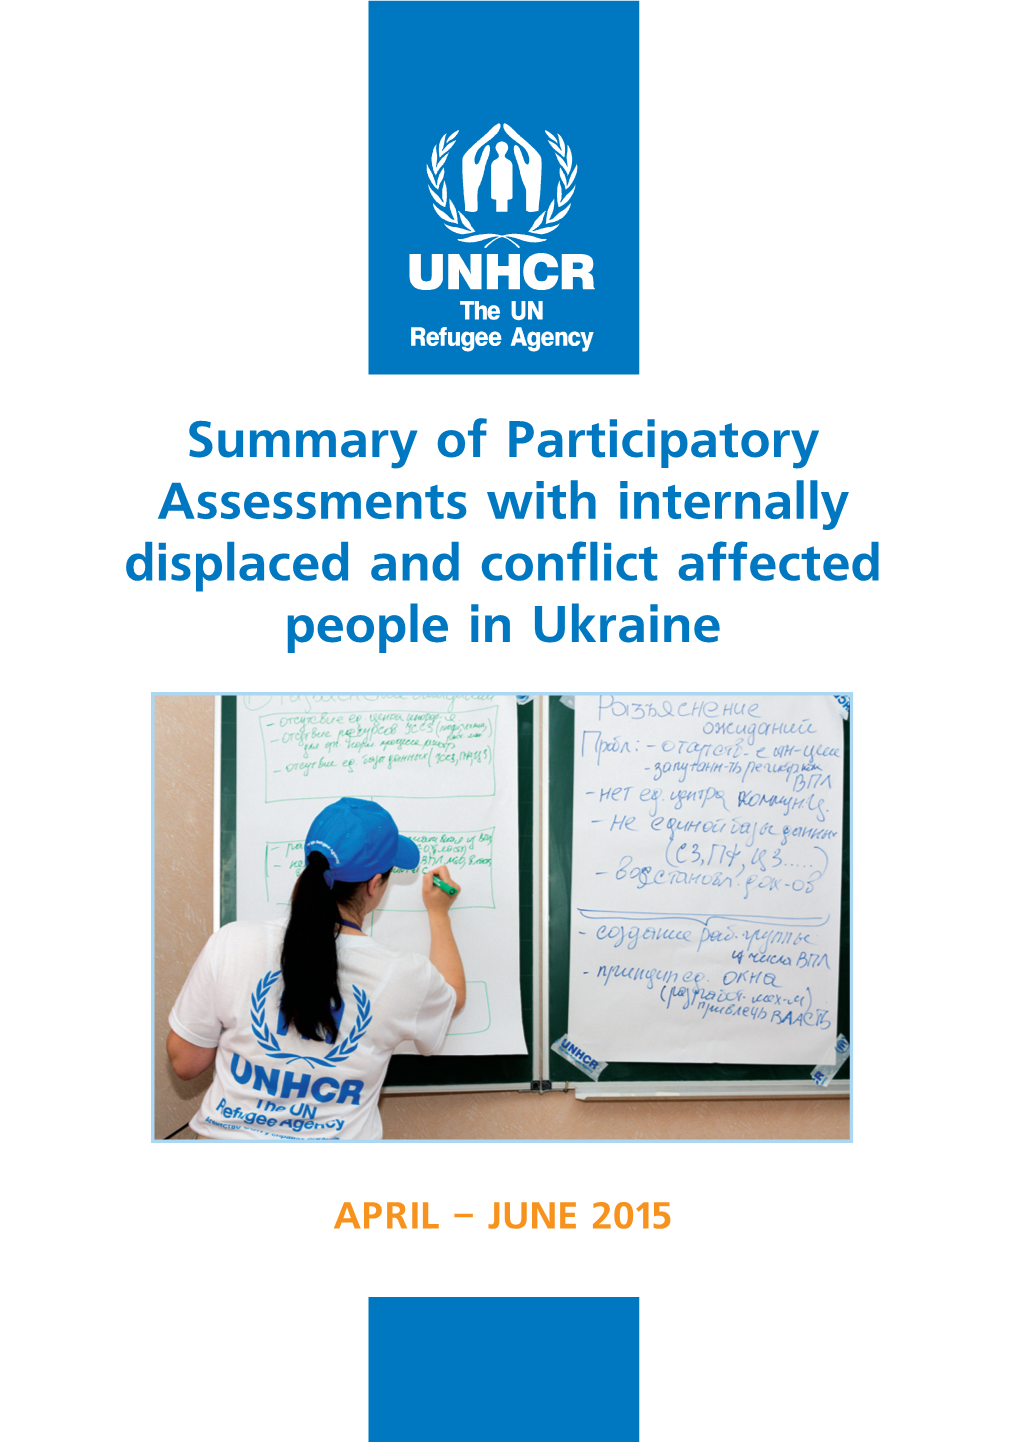 Summary of Participatory Assessments with Internally Displaced and Conflict Affected People in Ukraine